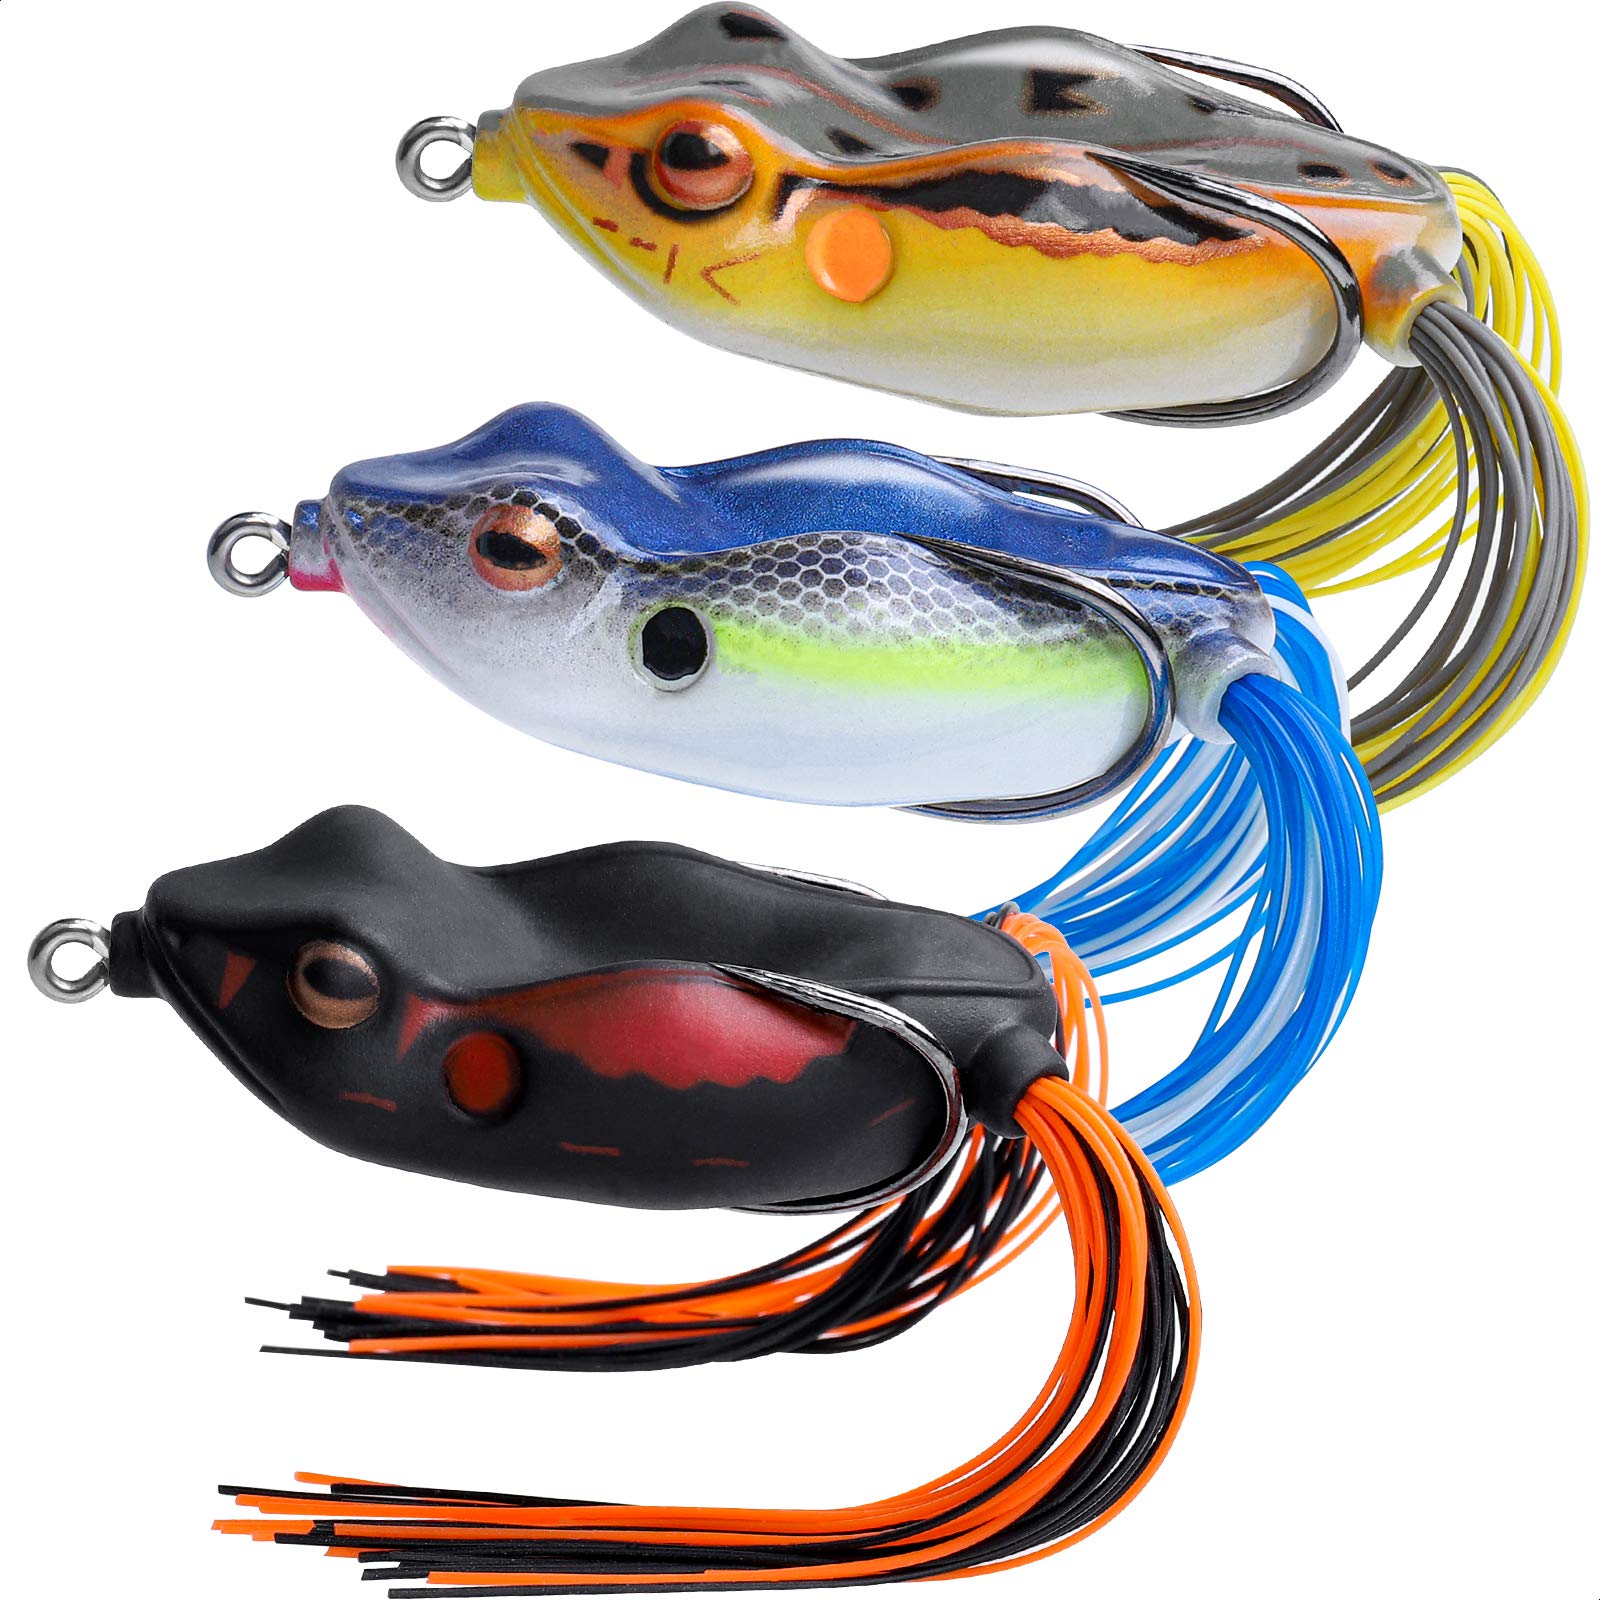 TRUSCEND Topwater Fishing Lures for Bass, Super Soft Hollow Rubber/Floating  Solid Foam Frog Lures, Perfect Surface Bass Lure, Weedless Ultra-Sharp BKK  Hooks, Soft Skirt Legs/Spinner Tail A-2.5,0.5oz